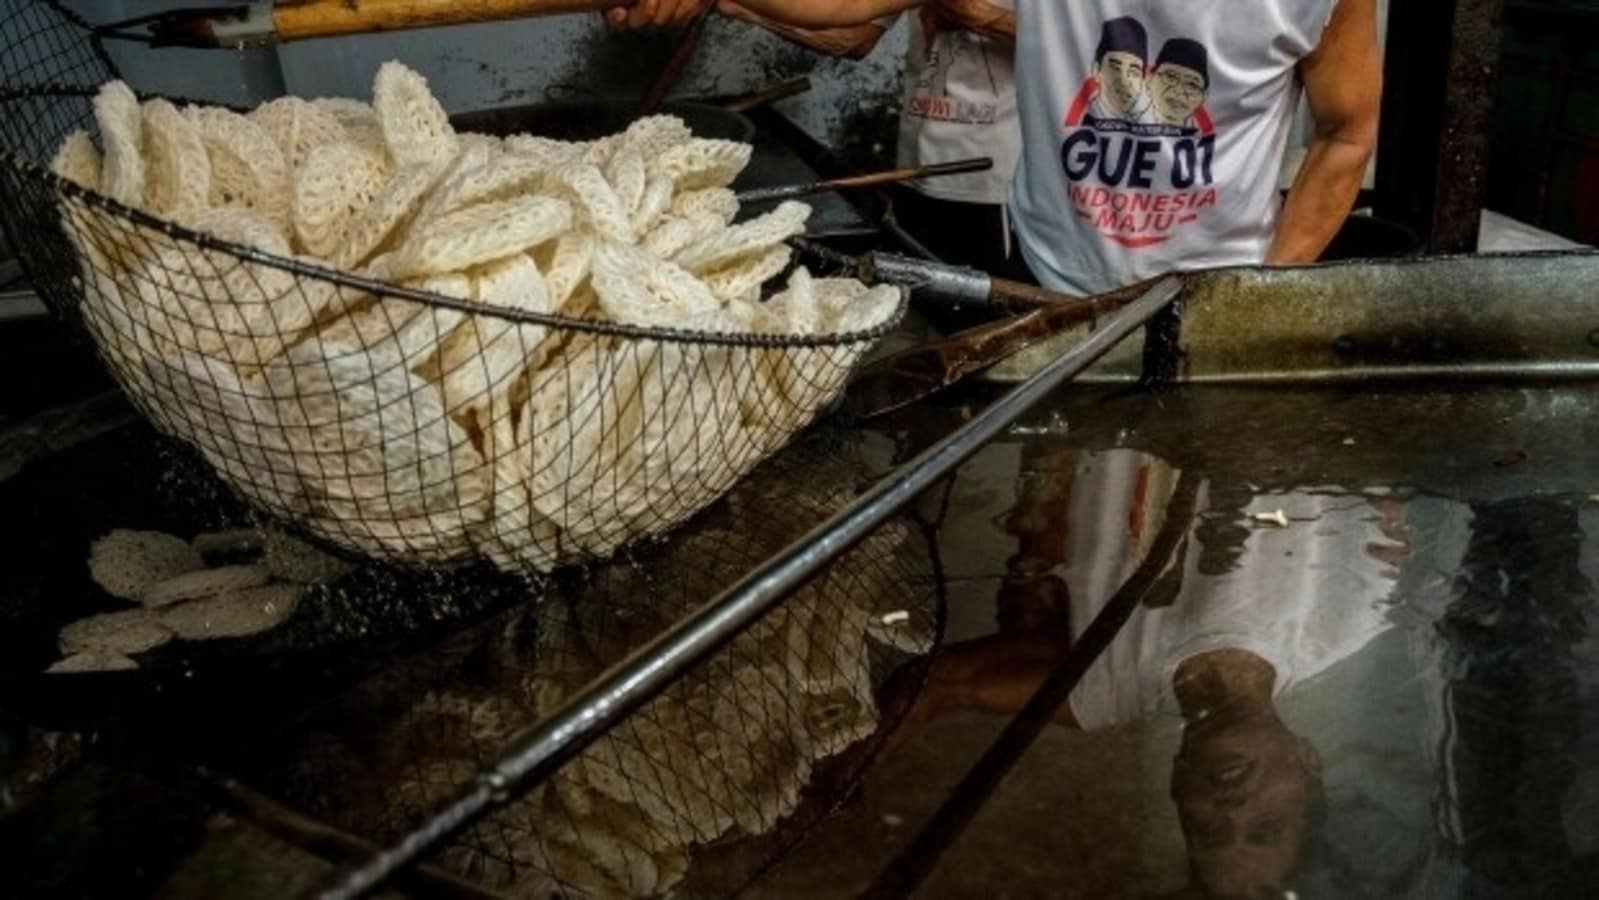 Indonesians Urged Against Fried Food as Cooking Oil Prices Rise